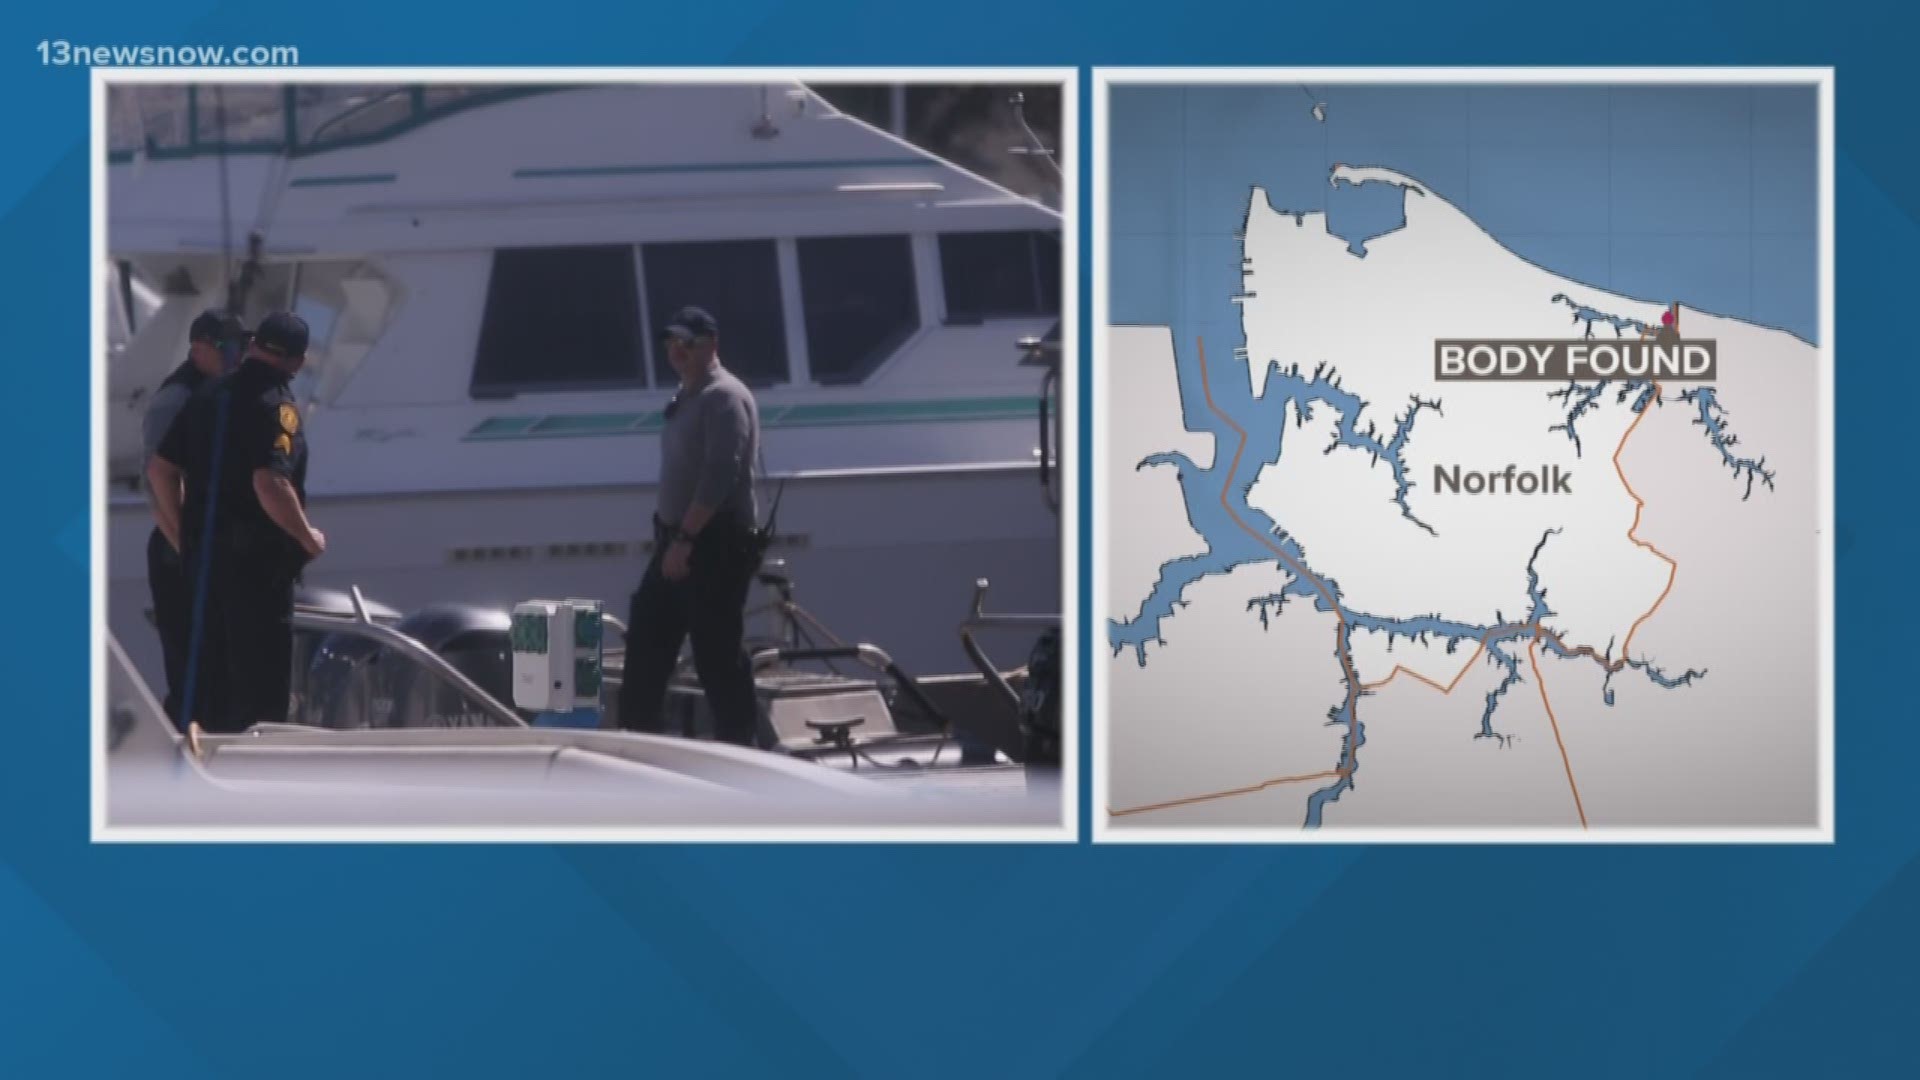 Police identified the body found in the water as 54-year-old Edward Blais of Norfolk. According to police, he went kayaking Sunday and never returned.